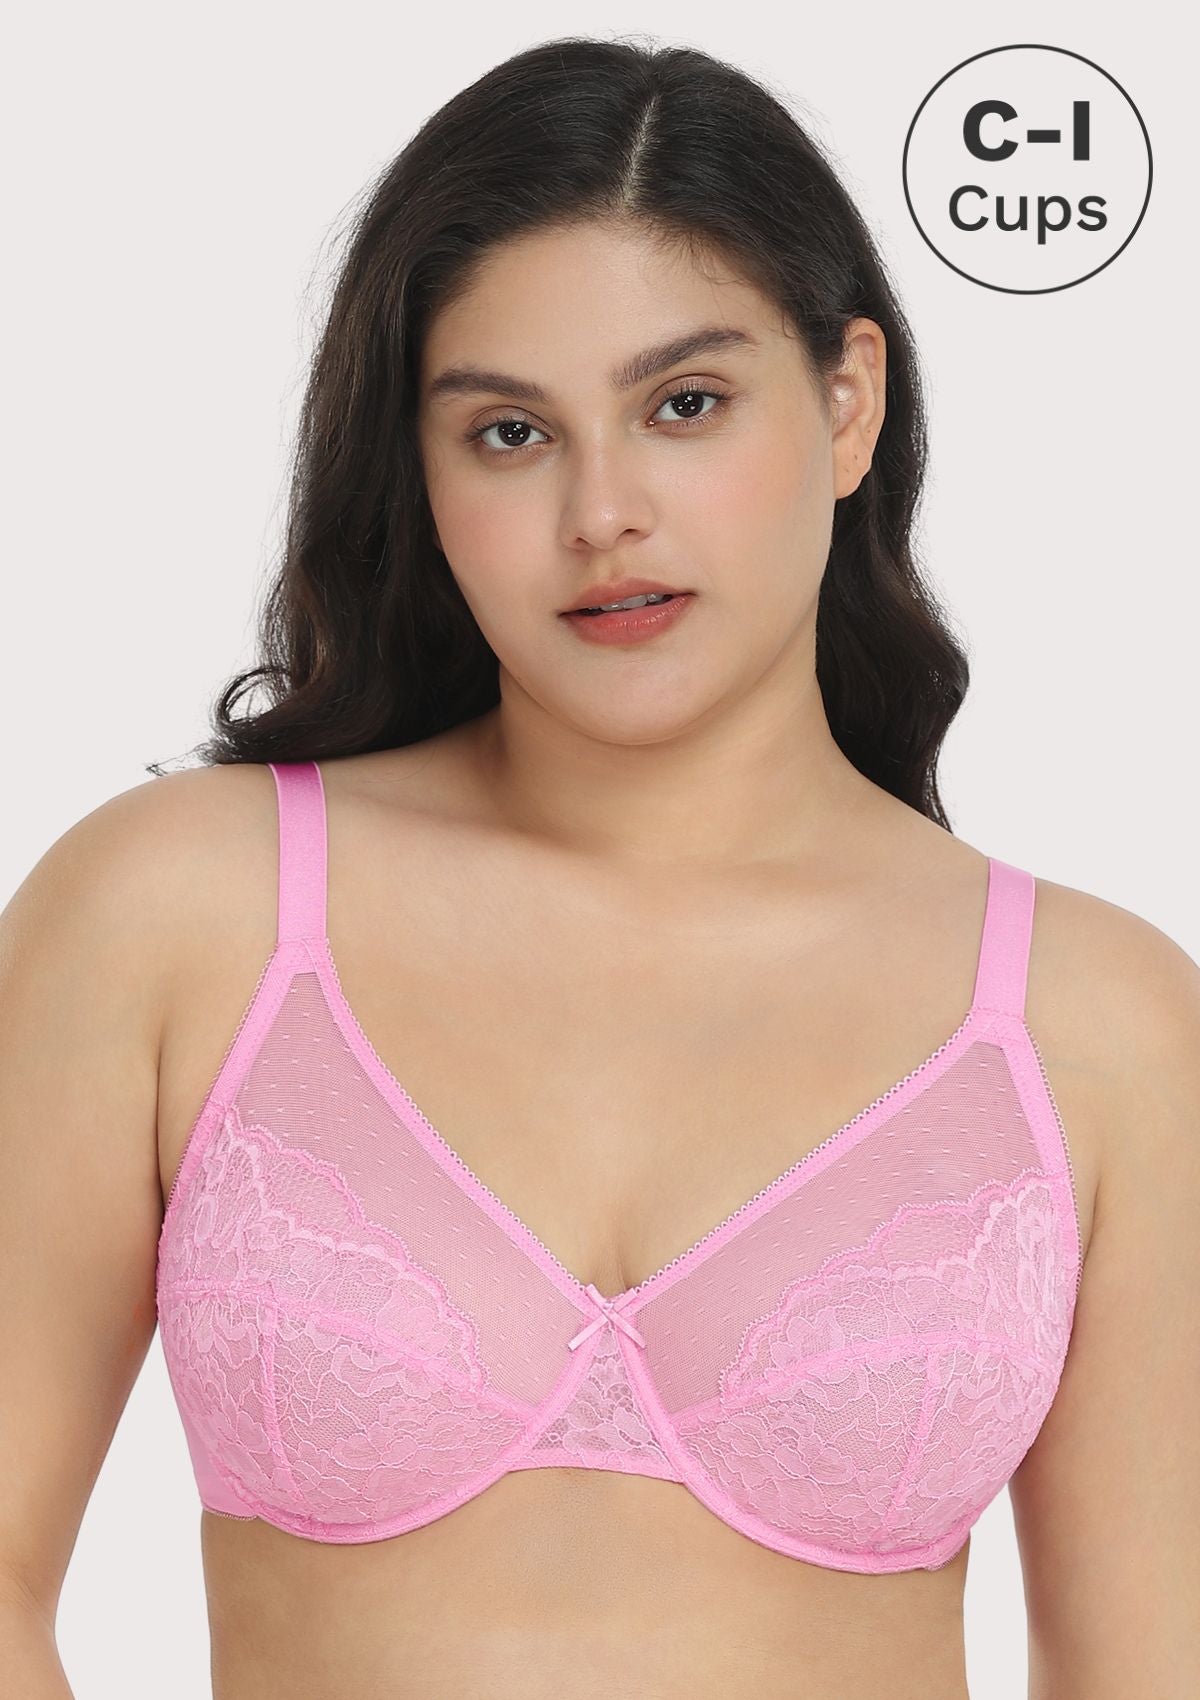 HSIA Enchante Lacy Bra: Comfy Sheer Lace Bra With Lift - Pink / 34 / H